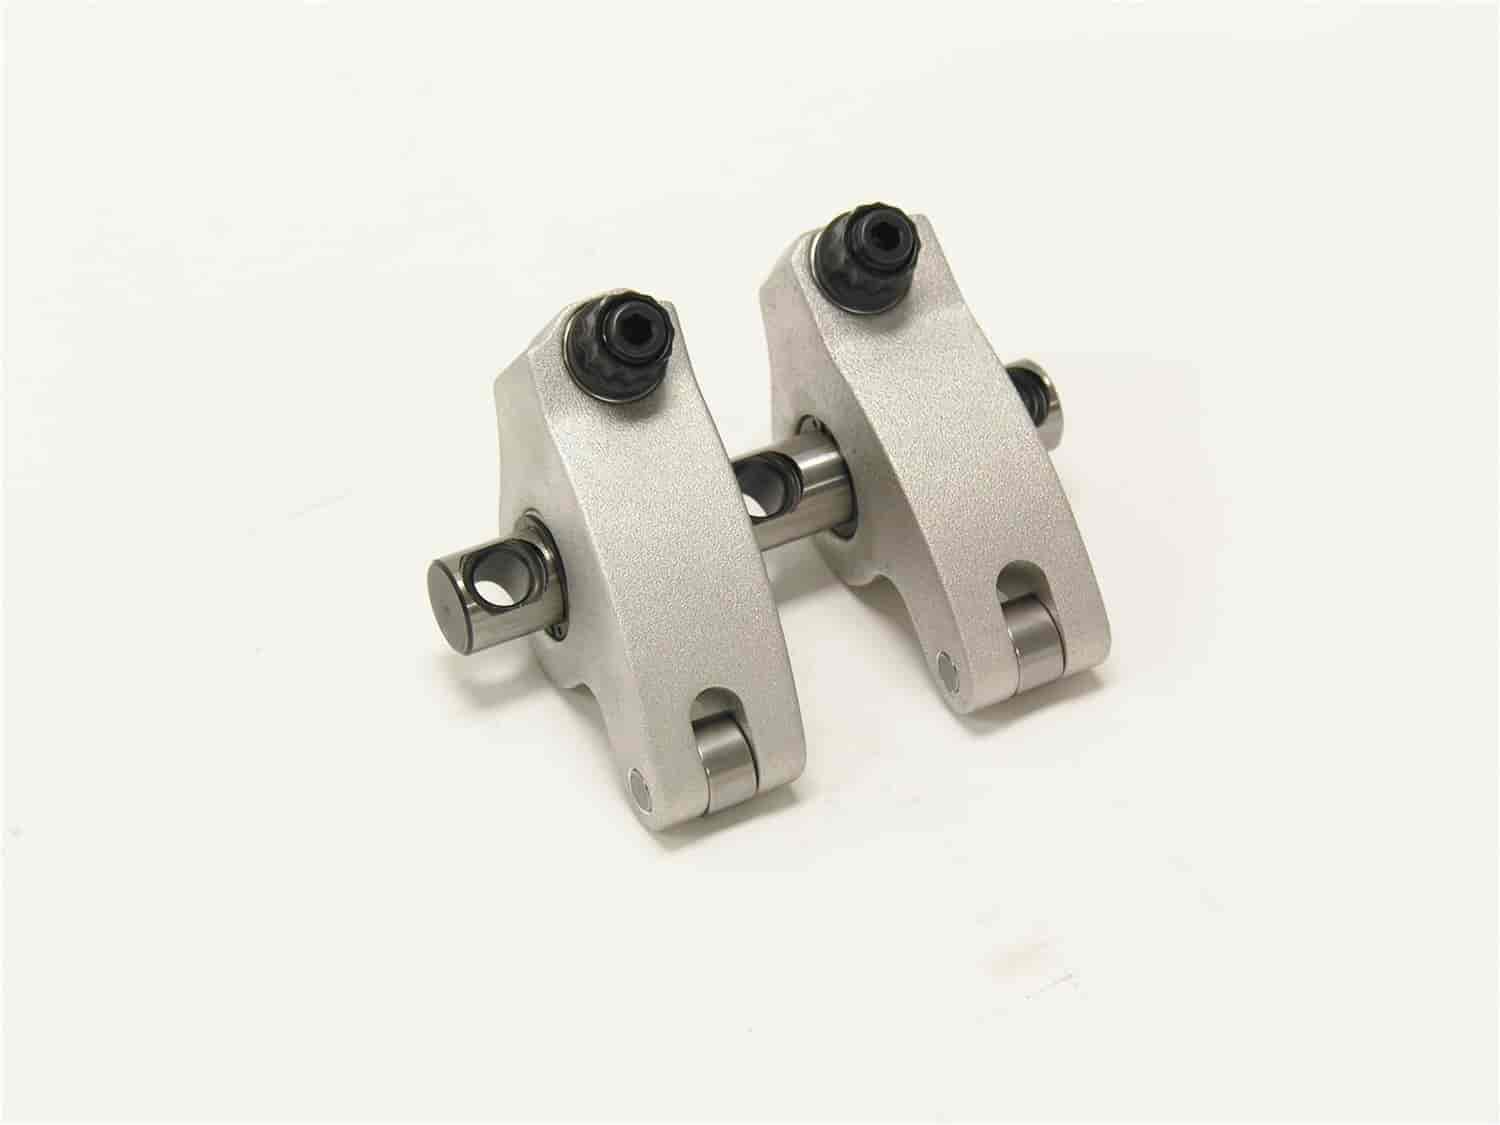 Series SS Shaft Mount Rockers Fits: AFR 165/225cc Outlaw SB-Ford Rocker Ratio: 1.5 IN / 1.5 EX